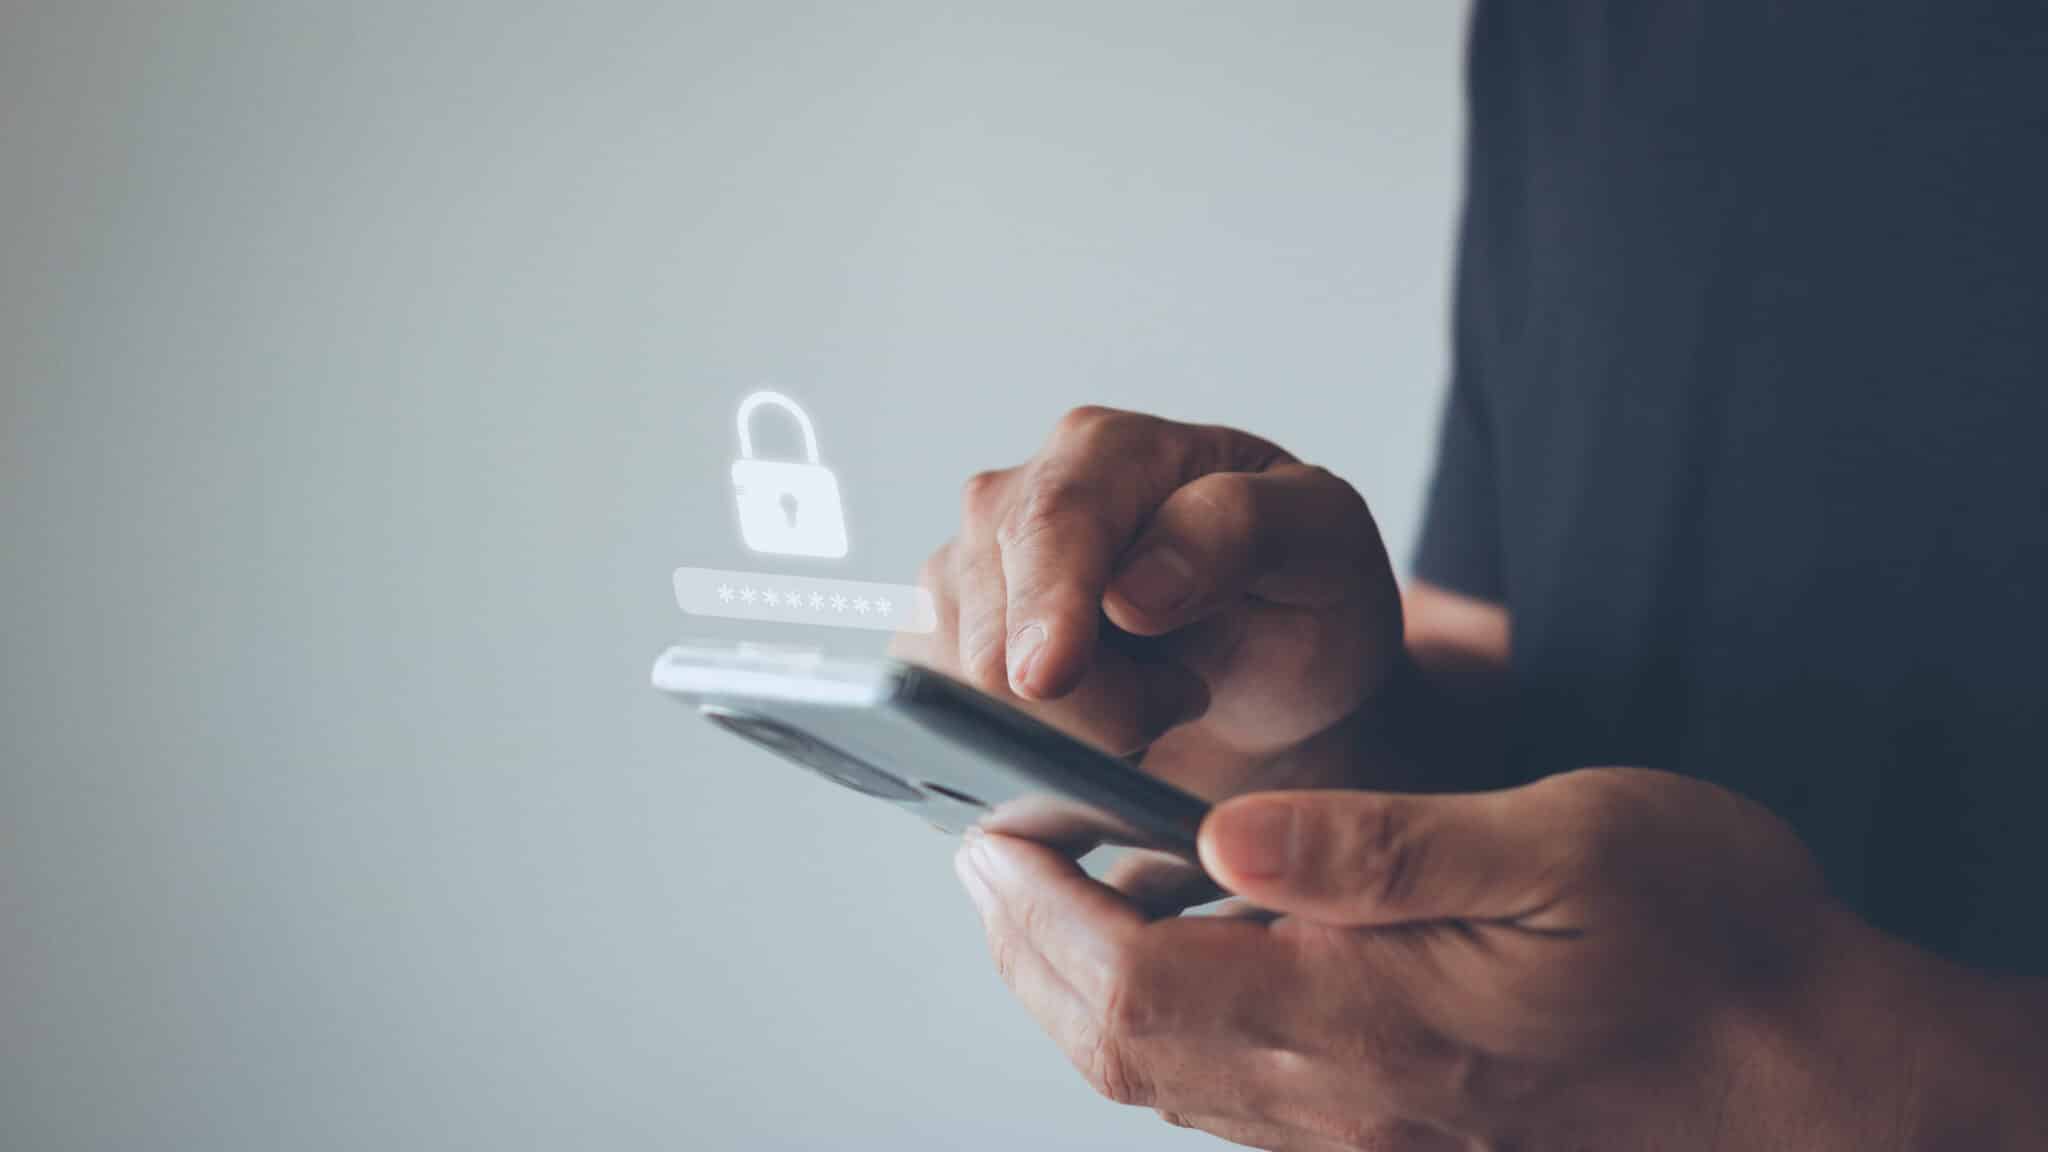 Secure My Device: Bolster Your Phone Security With These 4 Apps